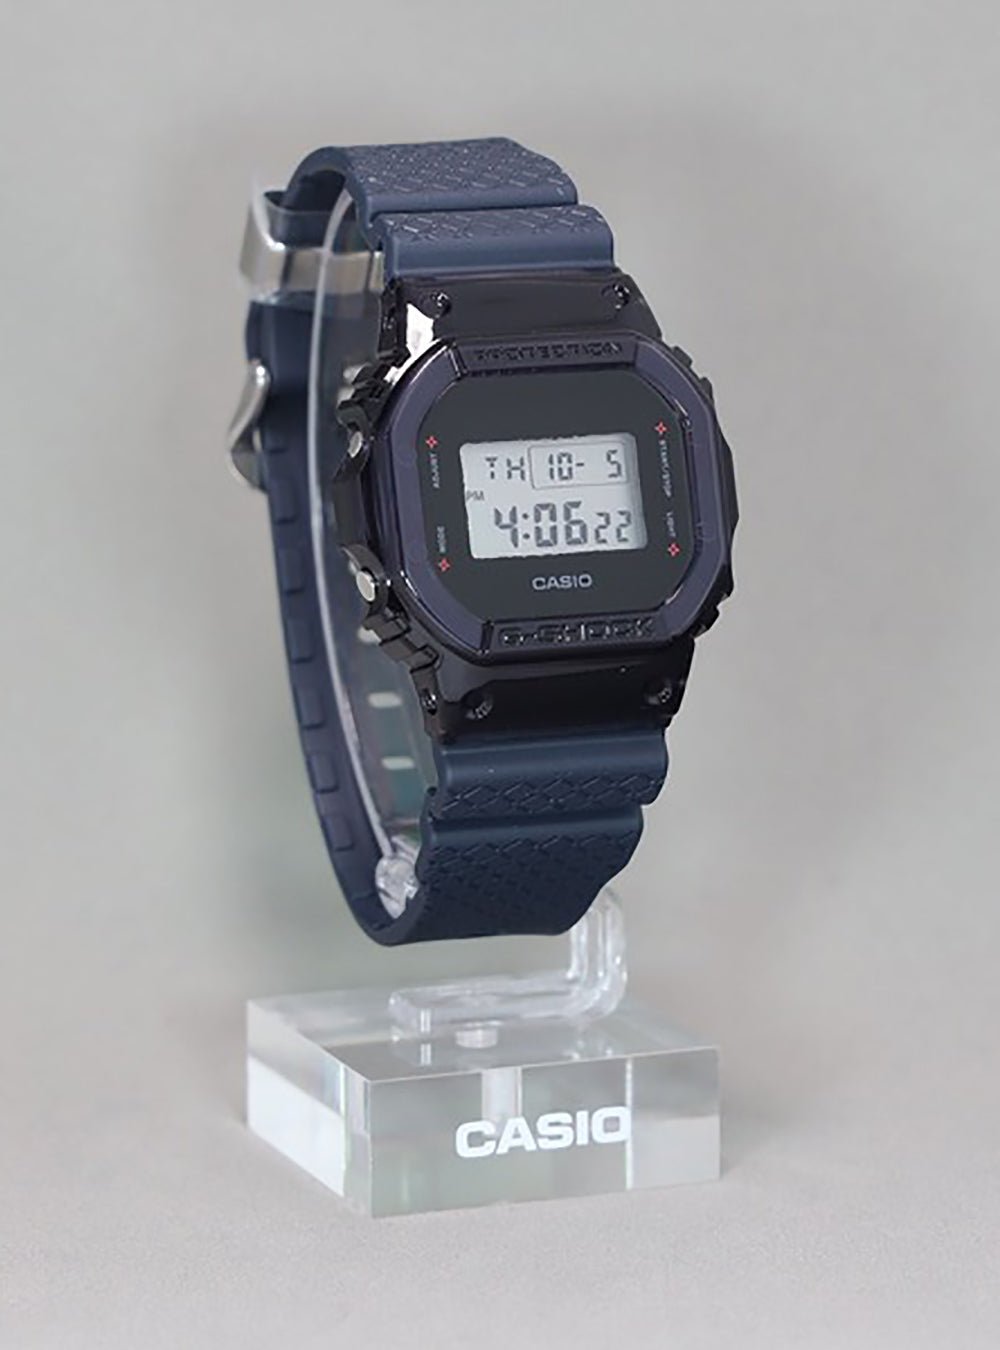 CASIO G-SHOCK NINJA SERIES LIMITED EDITION MADE IN JAPAN